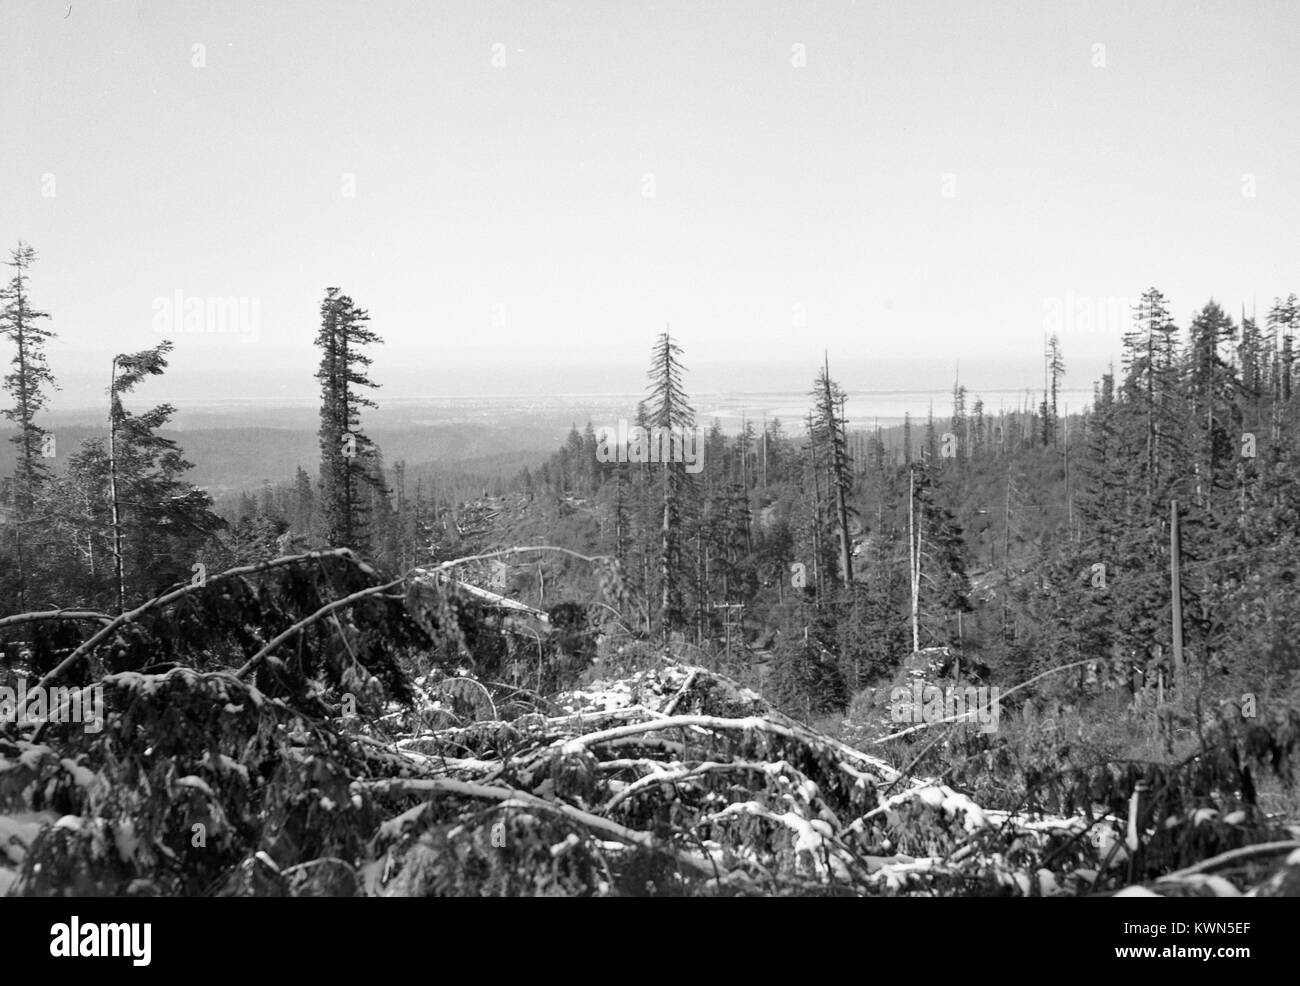 A forest of evergreen trees covered in snow, in a desolate rural portion of Eureka, California, 1950. Stock Photo